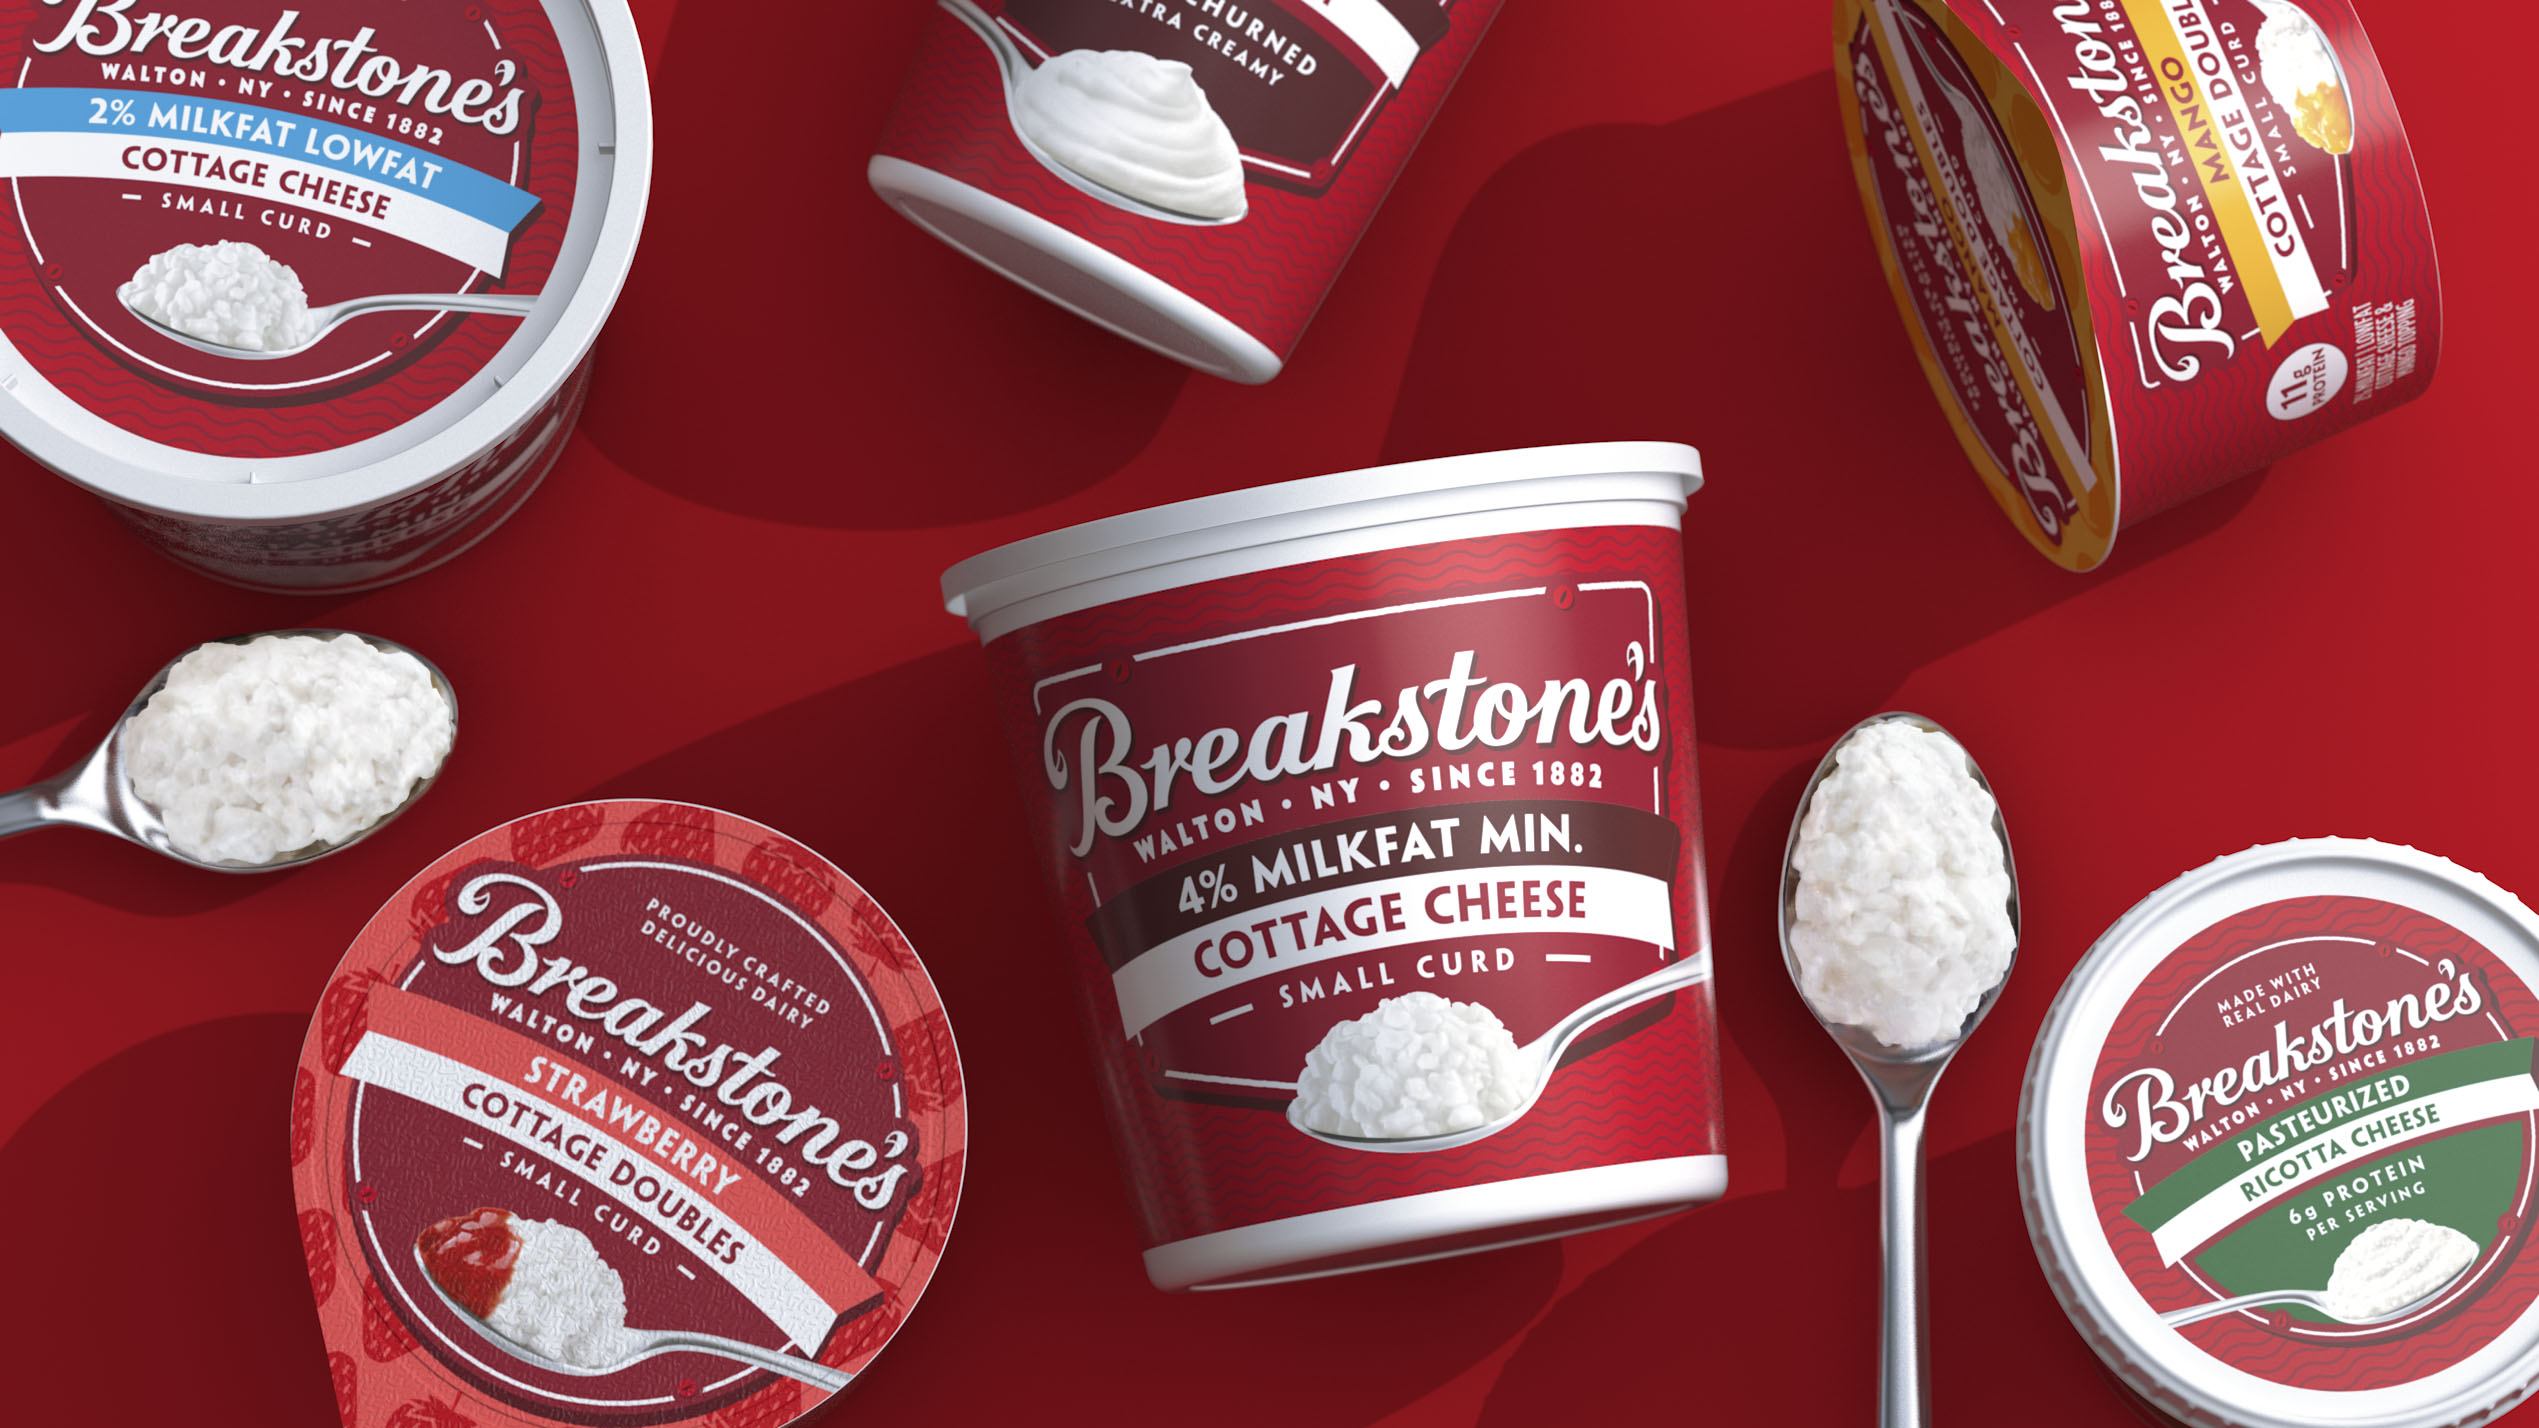 Breakstone’s Brings Culture Back to the Dairy Aisle with Brand Overhaul by BrandOpus